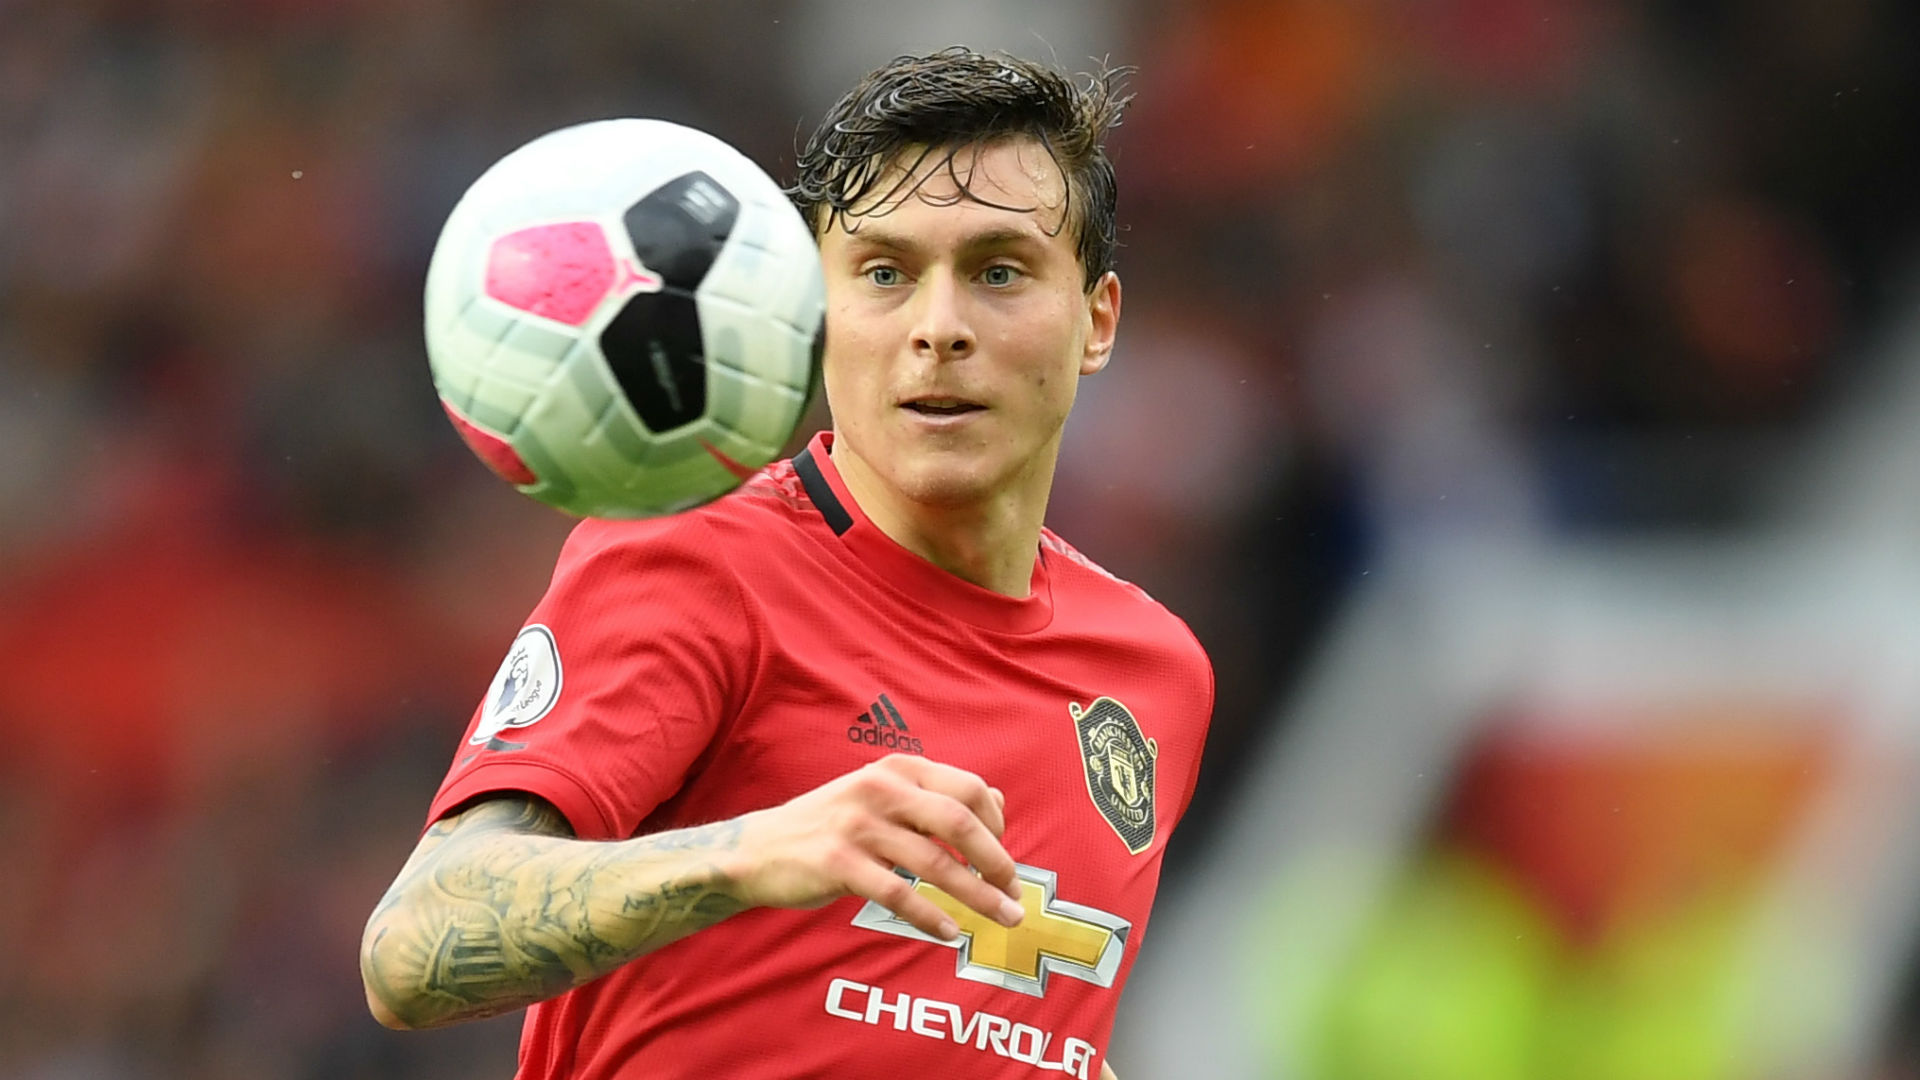 ‘Lindelof wanted to join a Championship club’ – Swede almost missed out on Man Utd, says ex-Benfica boss